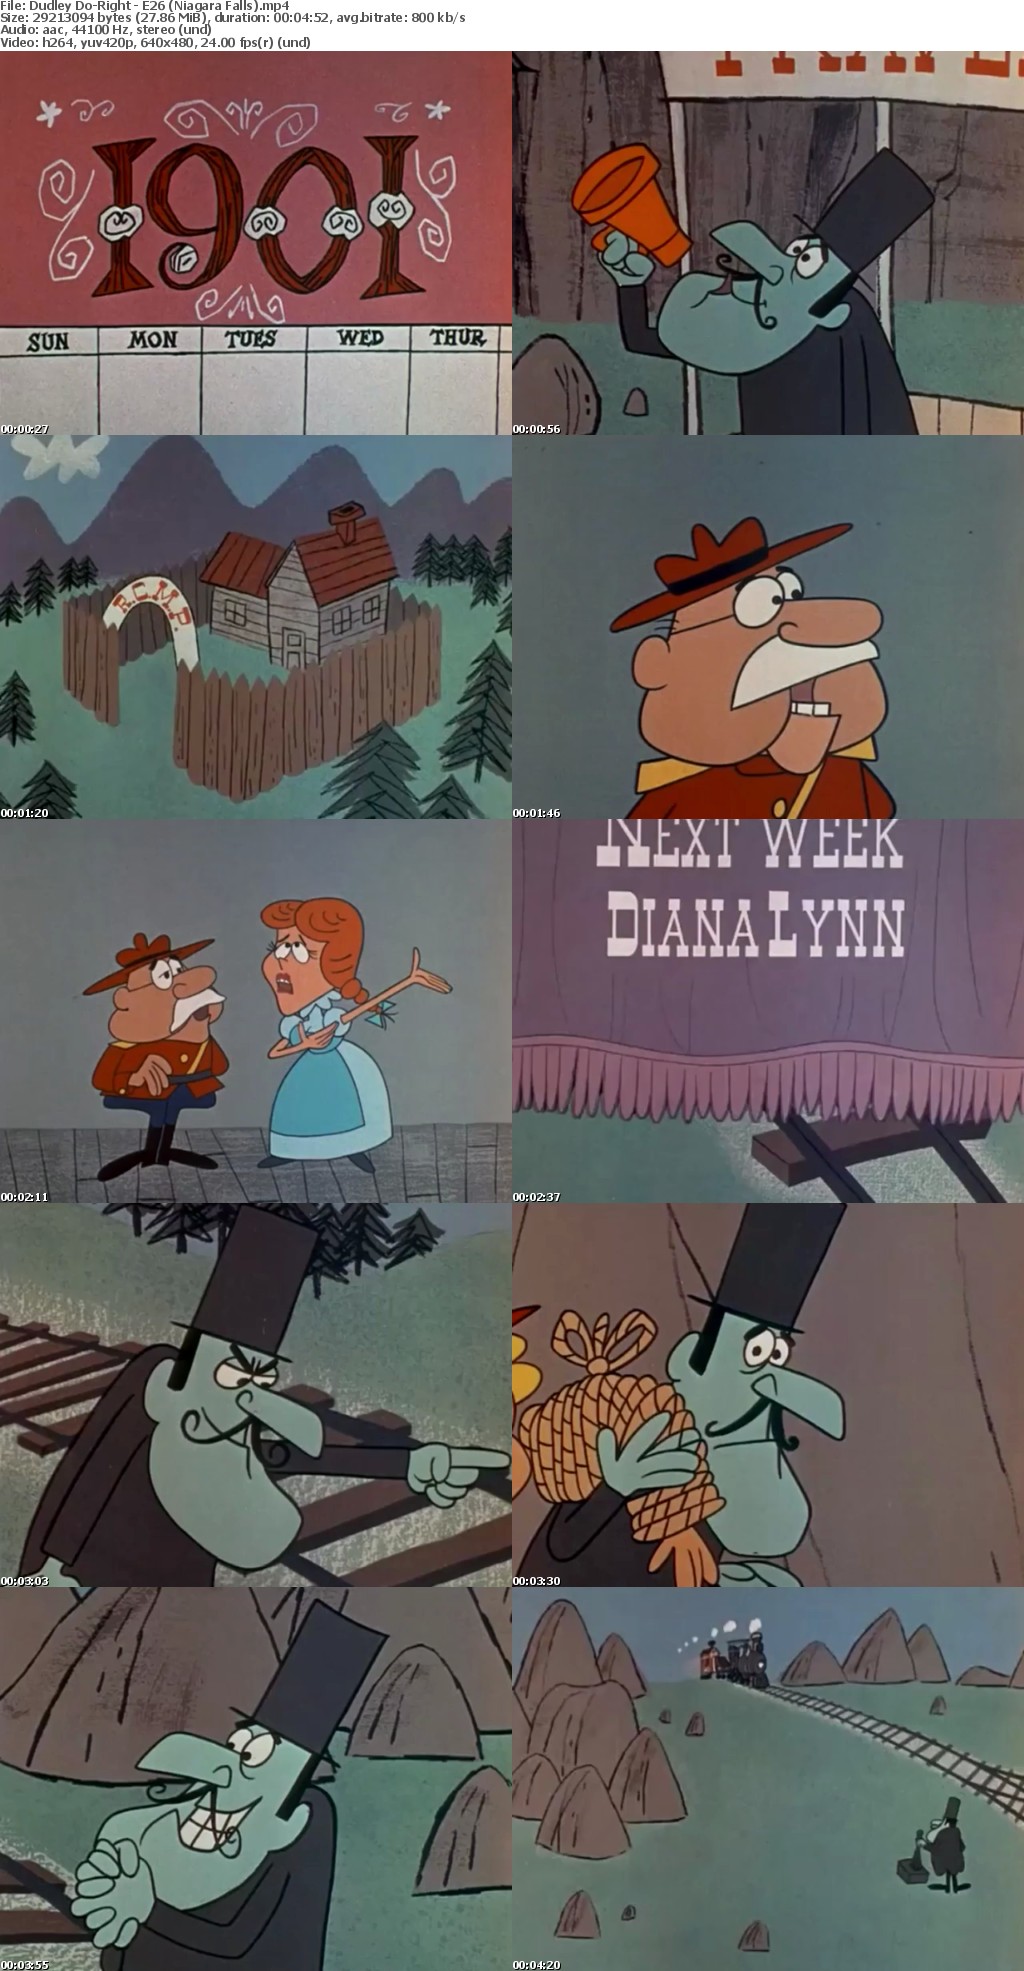 Dudley Do-Right (Complete cartoon series in MP4 format) Lando18